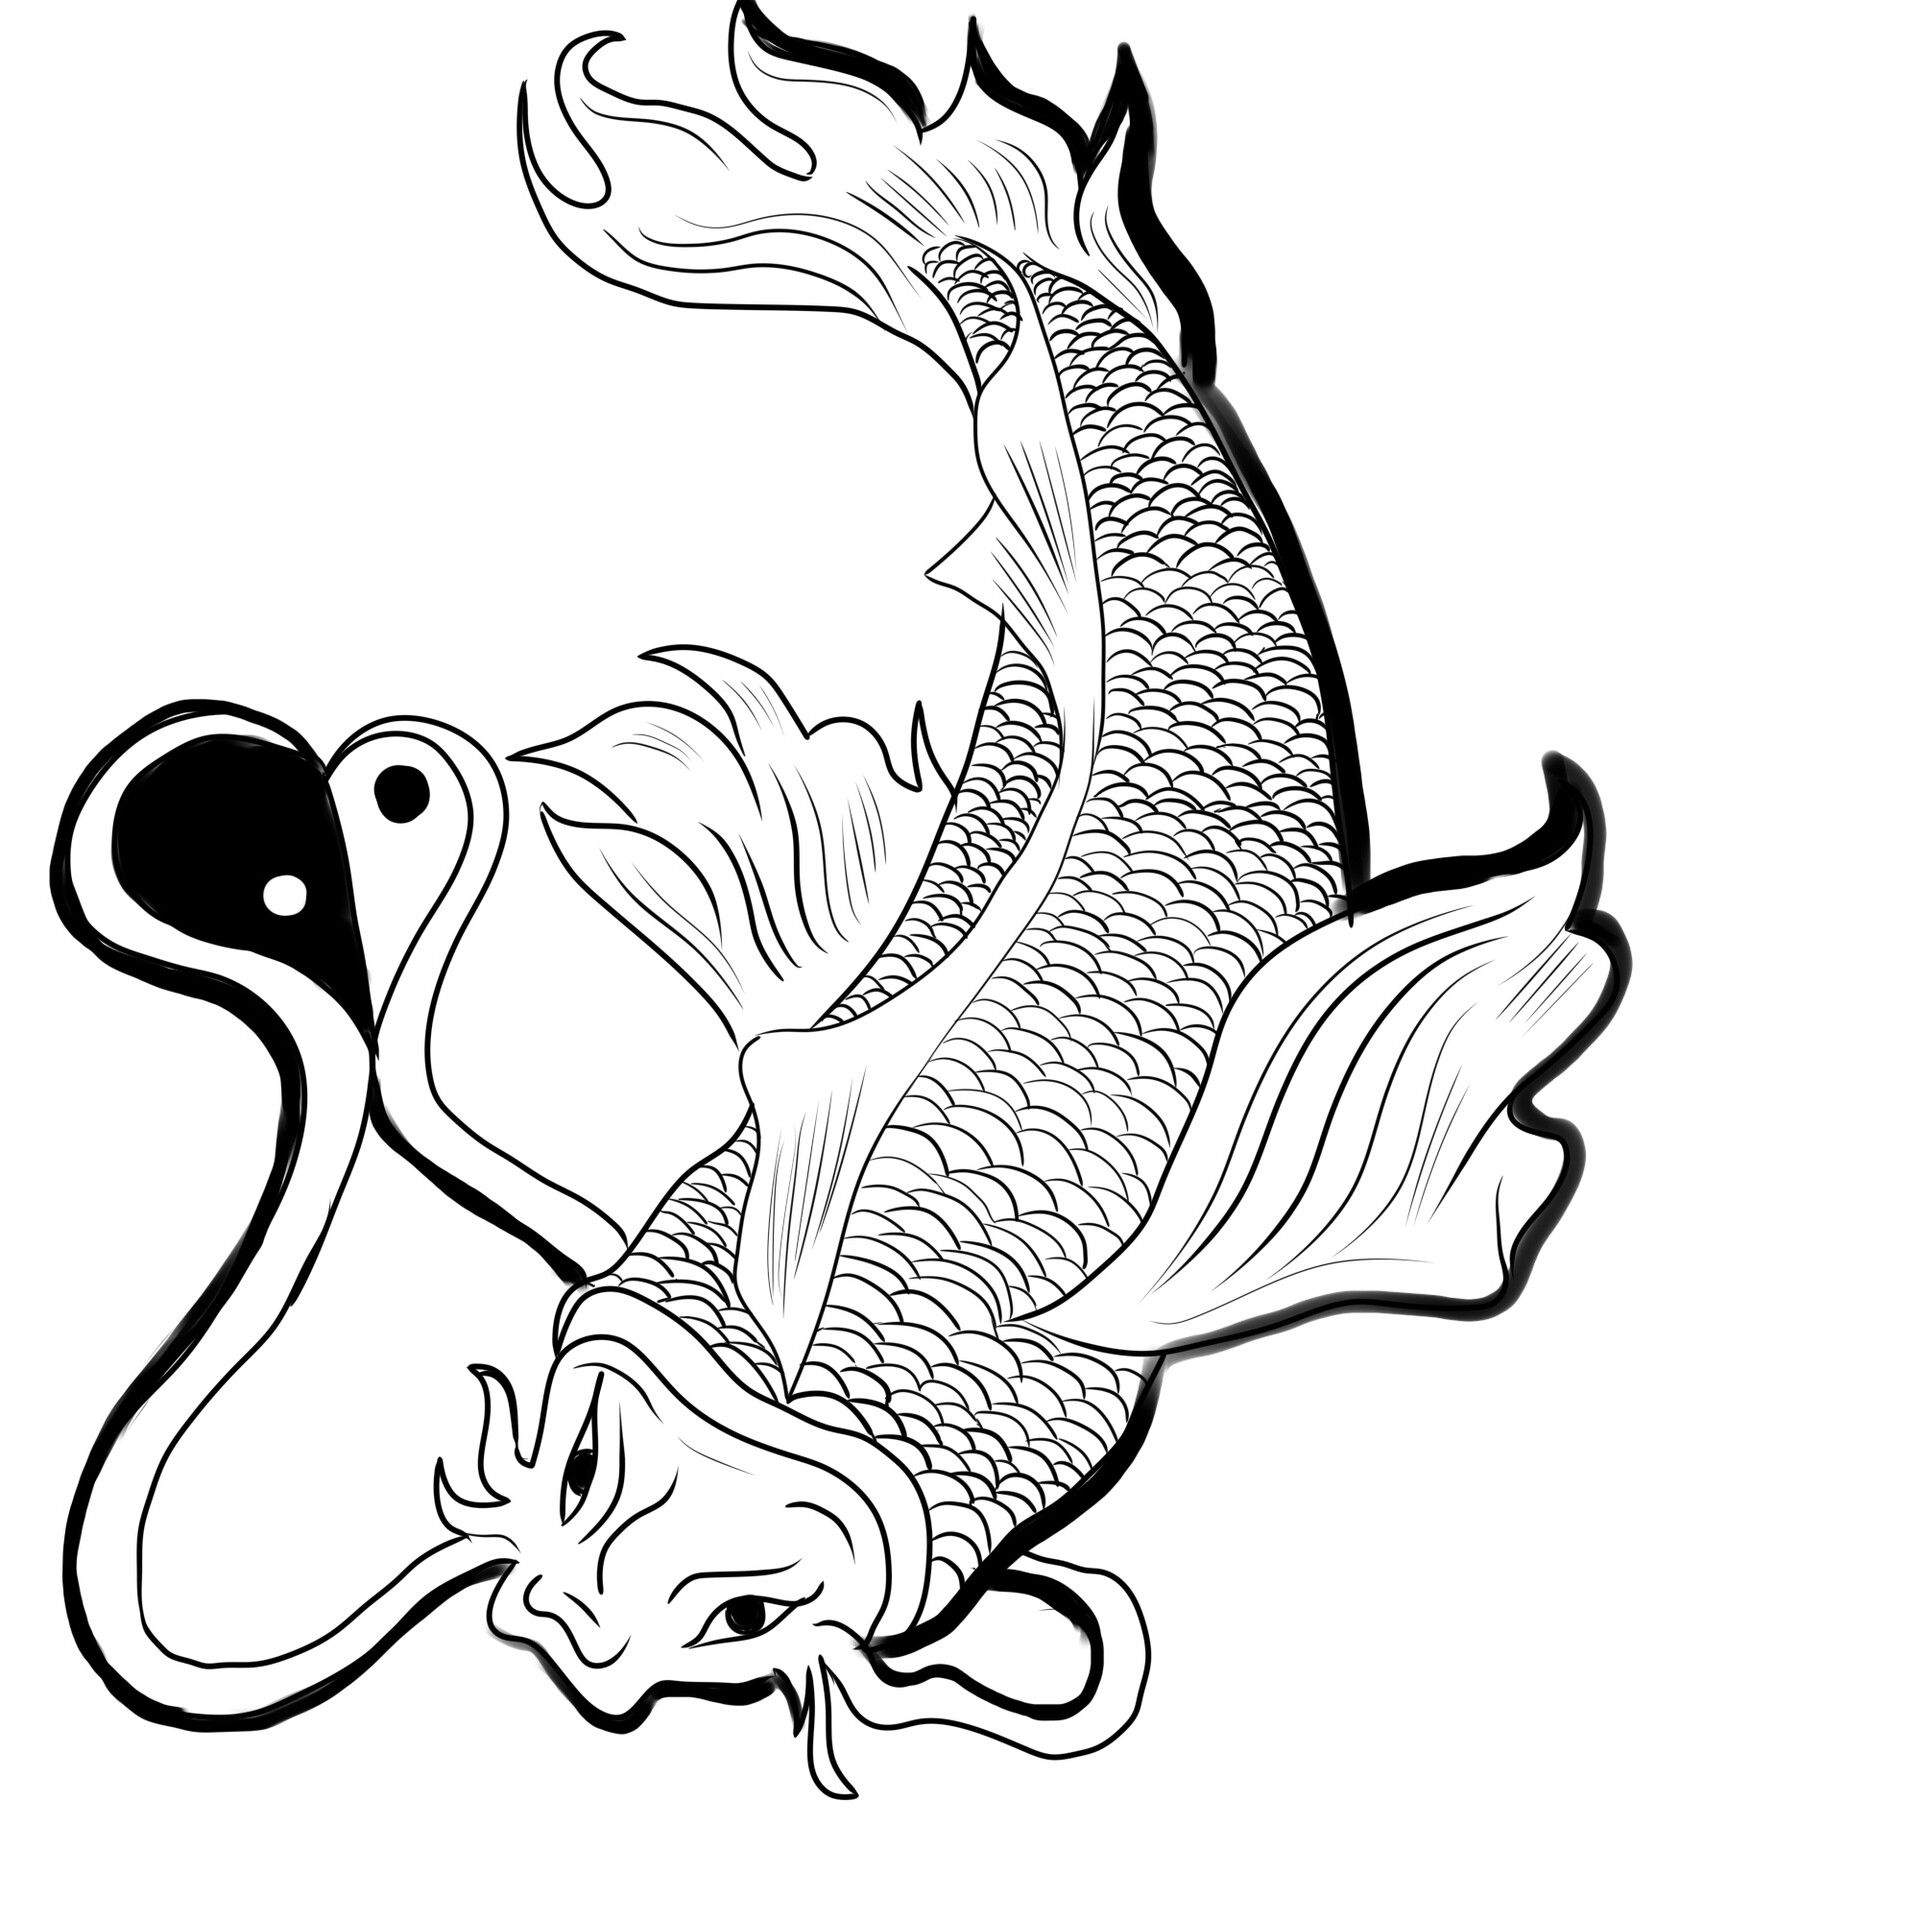 Hand Drawn Outline Koi Fish Tattoo Stock Vector Royalty Free 578204875   Shutterstock